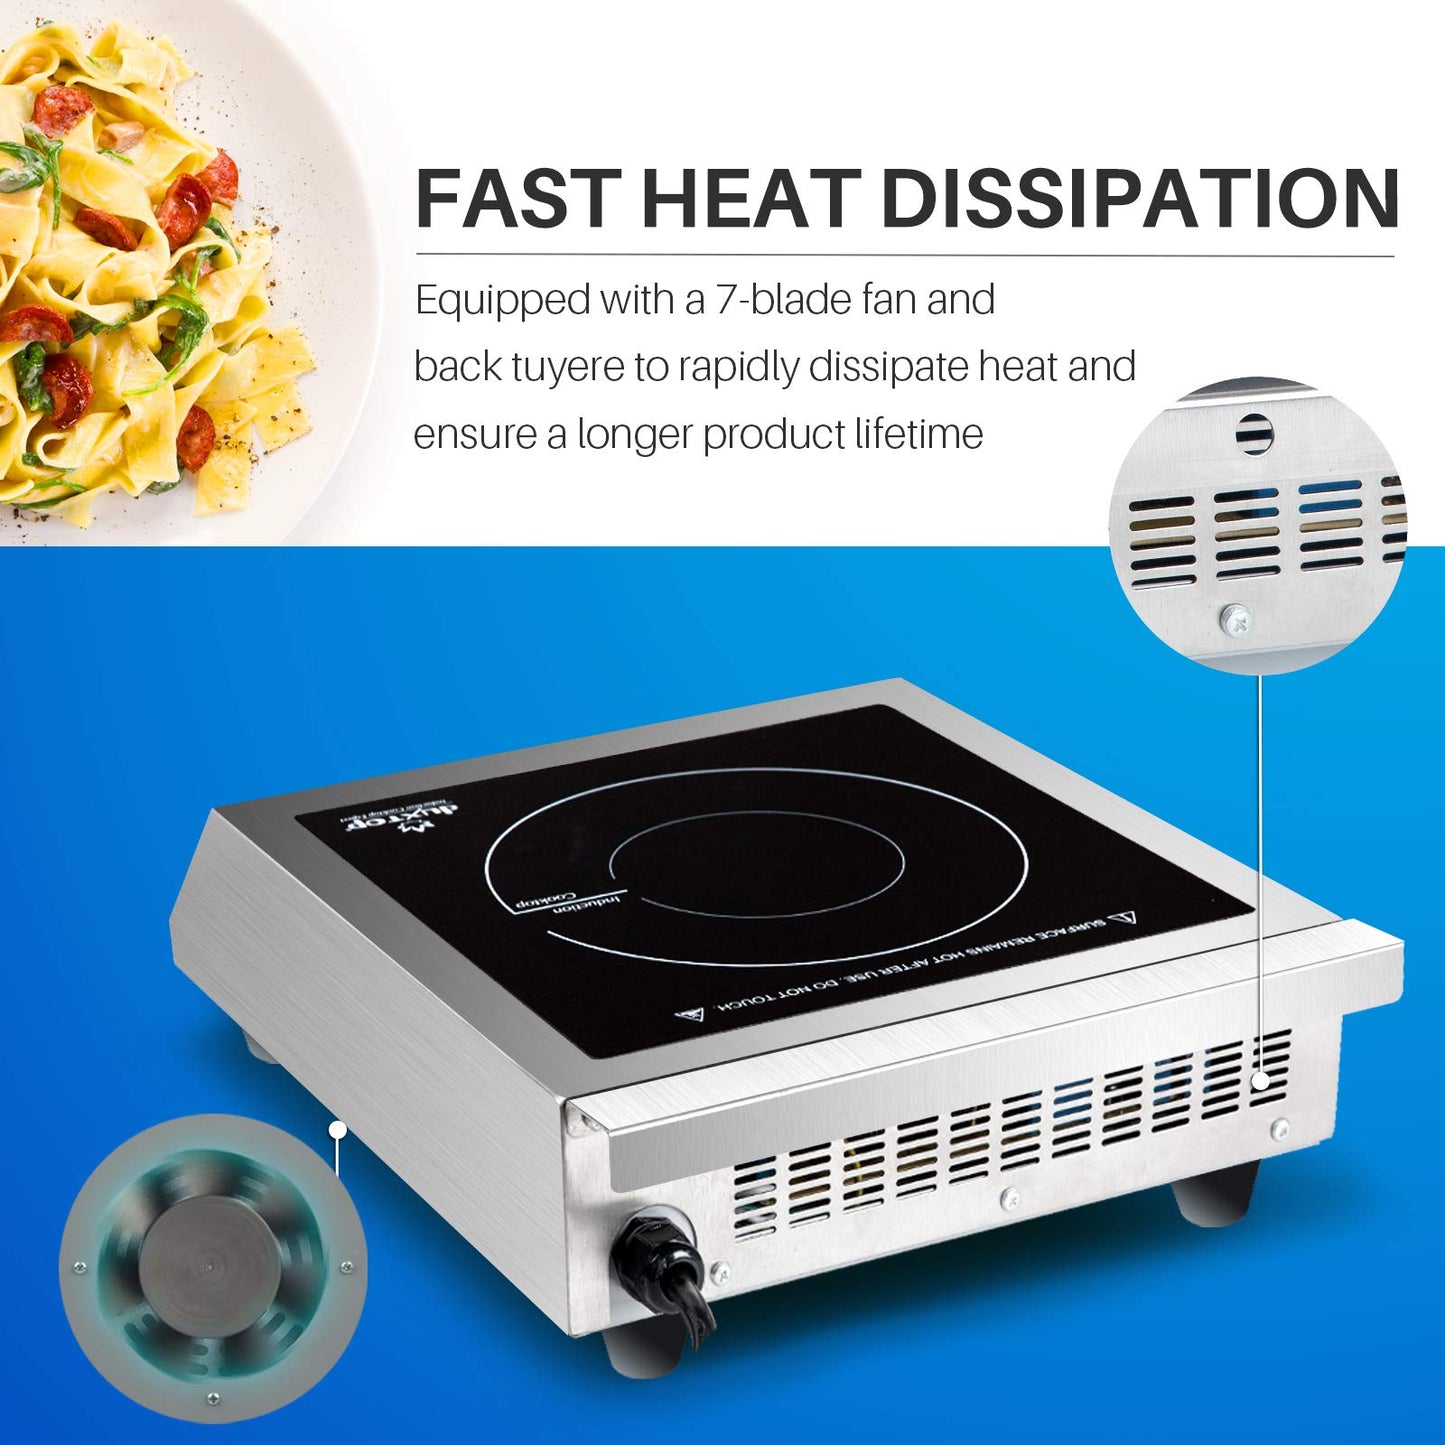 Duxtop Professional Portable Induction Cooktop, Commercial Range Countertop Burner, 1800 Watts Induction Burner with Sensor Touch